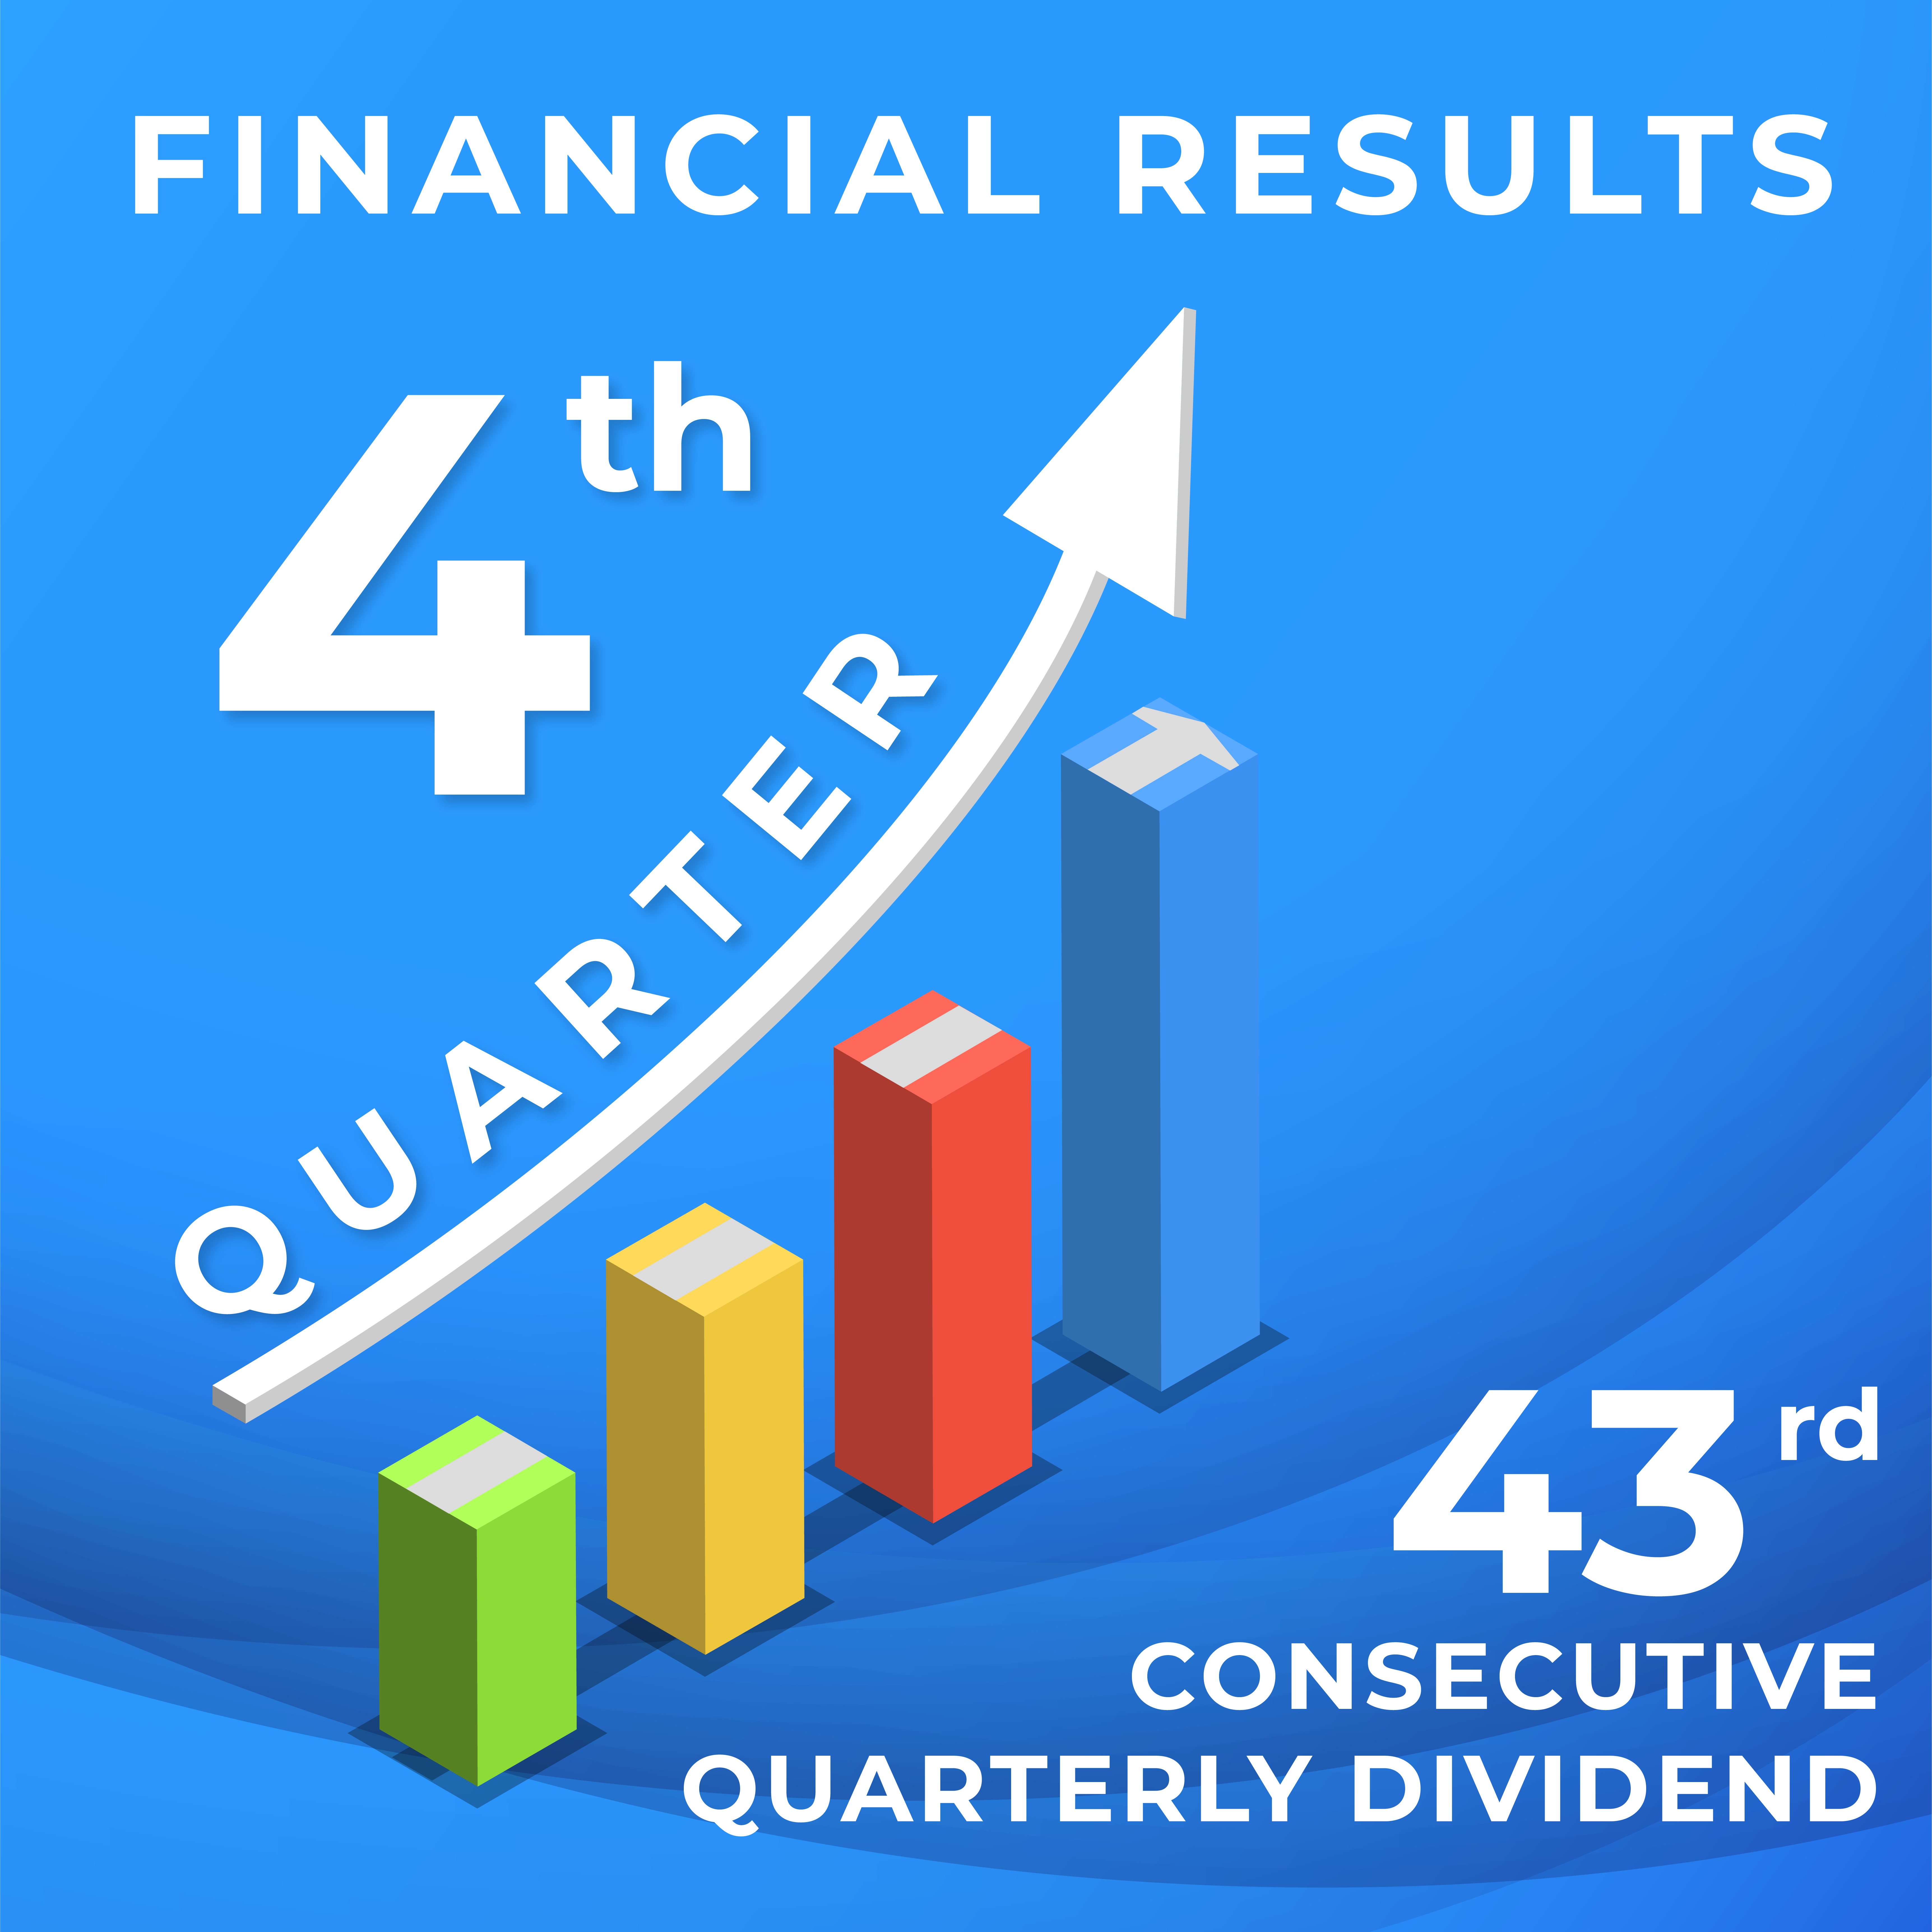 Financial Results for 4th Quarter. 43rd Consecutive quarterly dividend